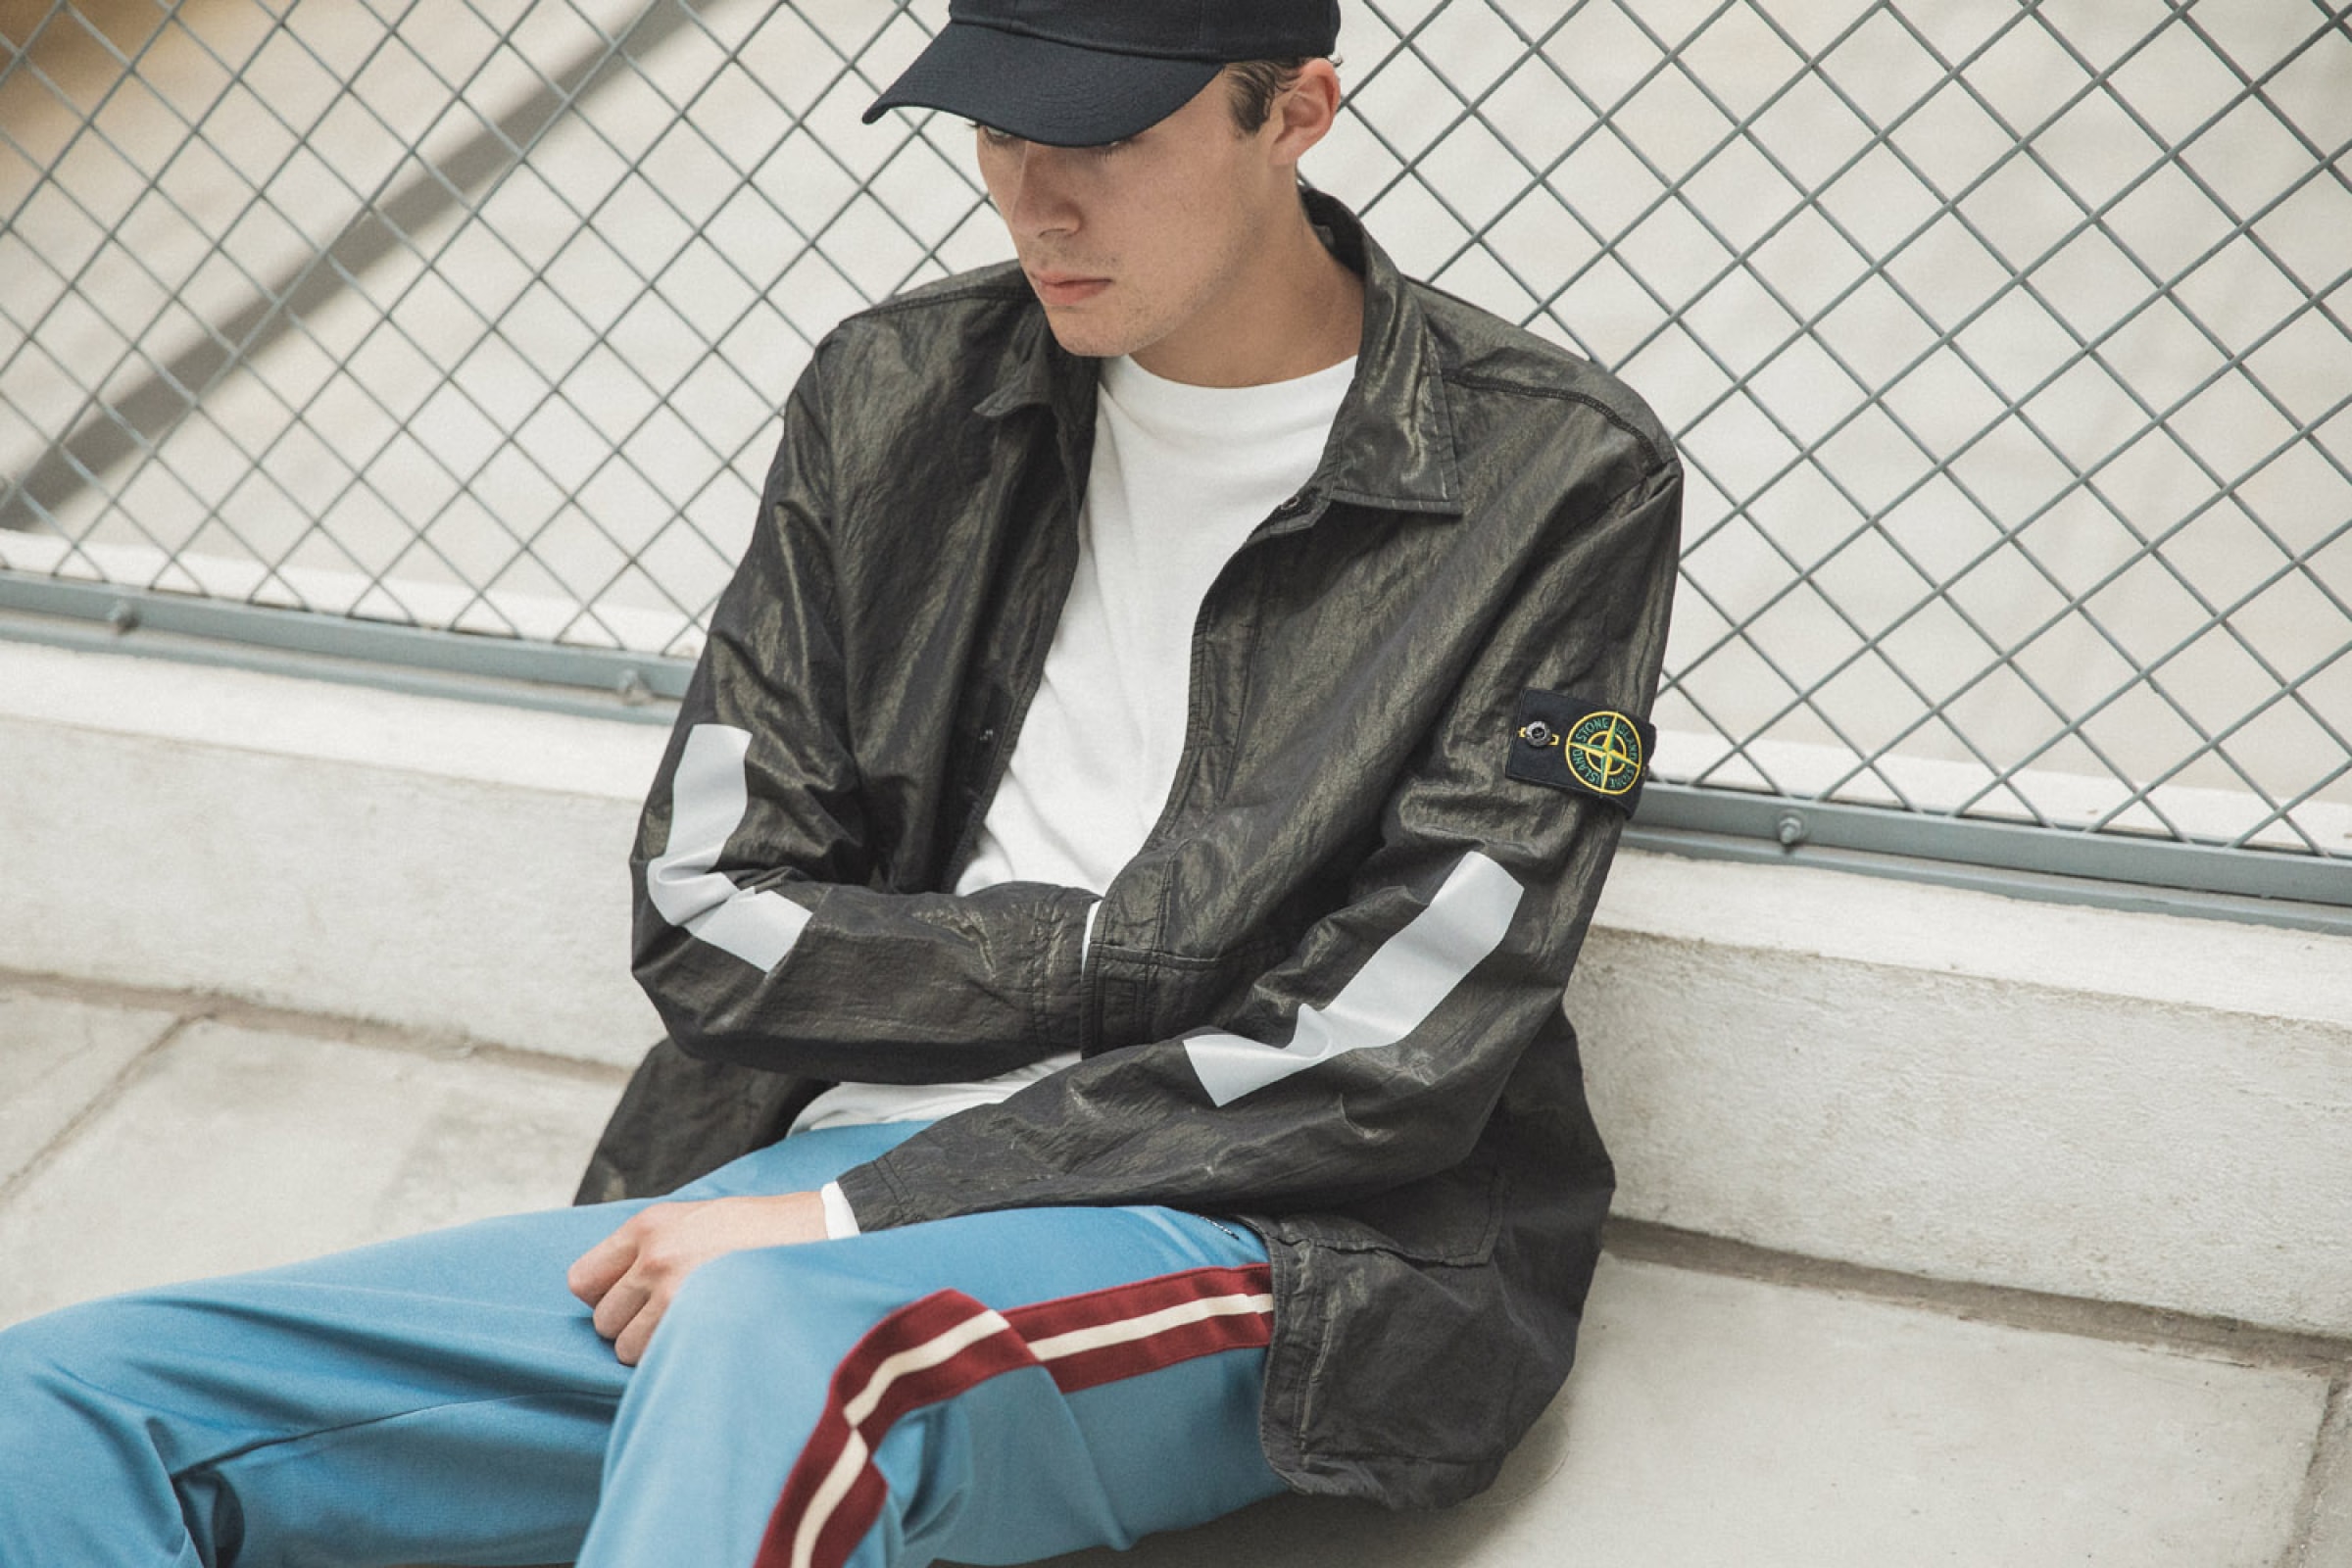 Stone Island Fall Winter 2018 Collection Editorial hbx jackets sweaters pants crewneck pullovers